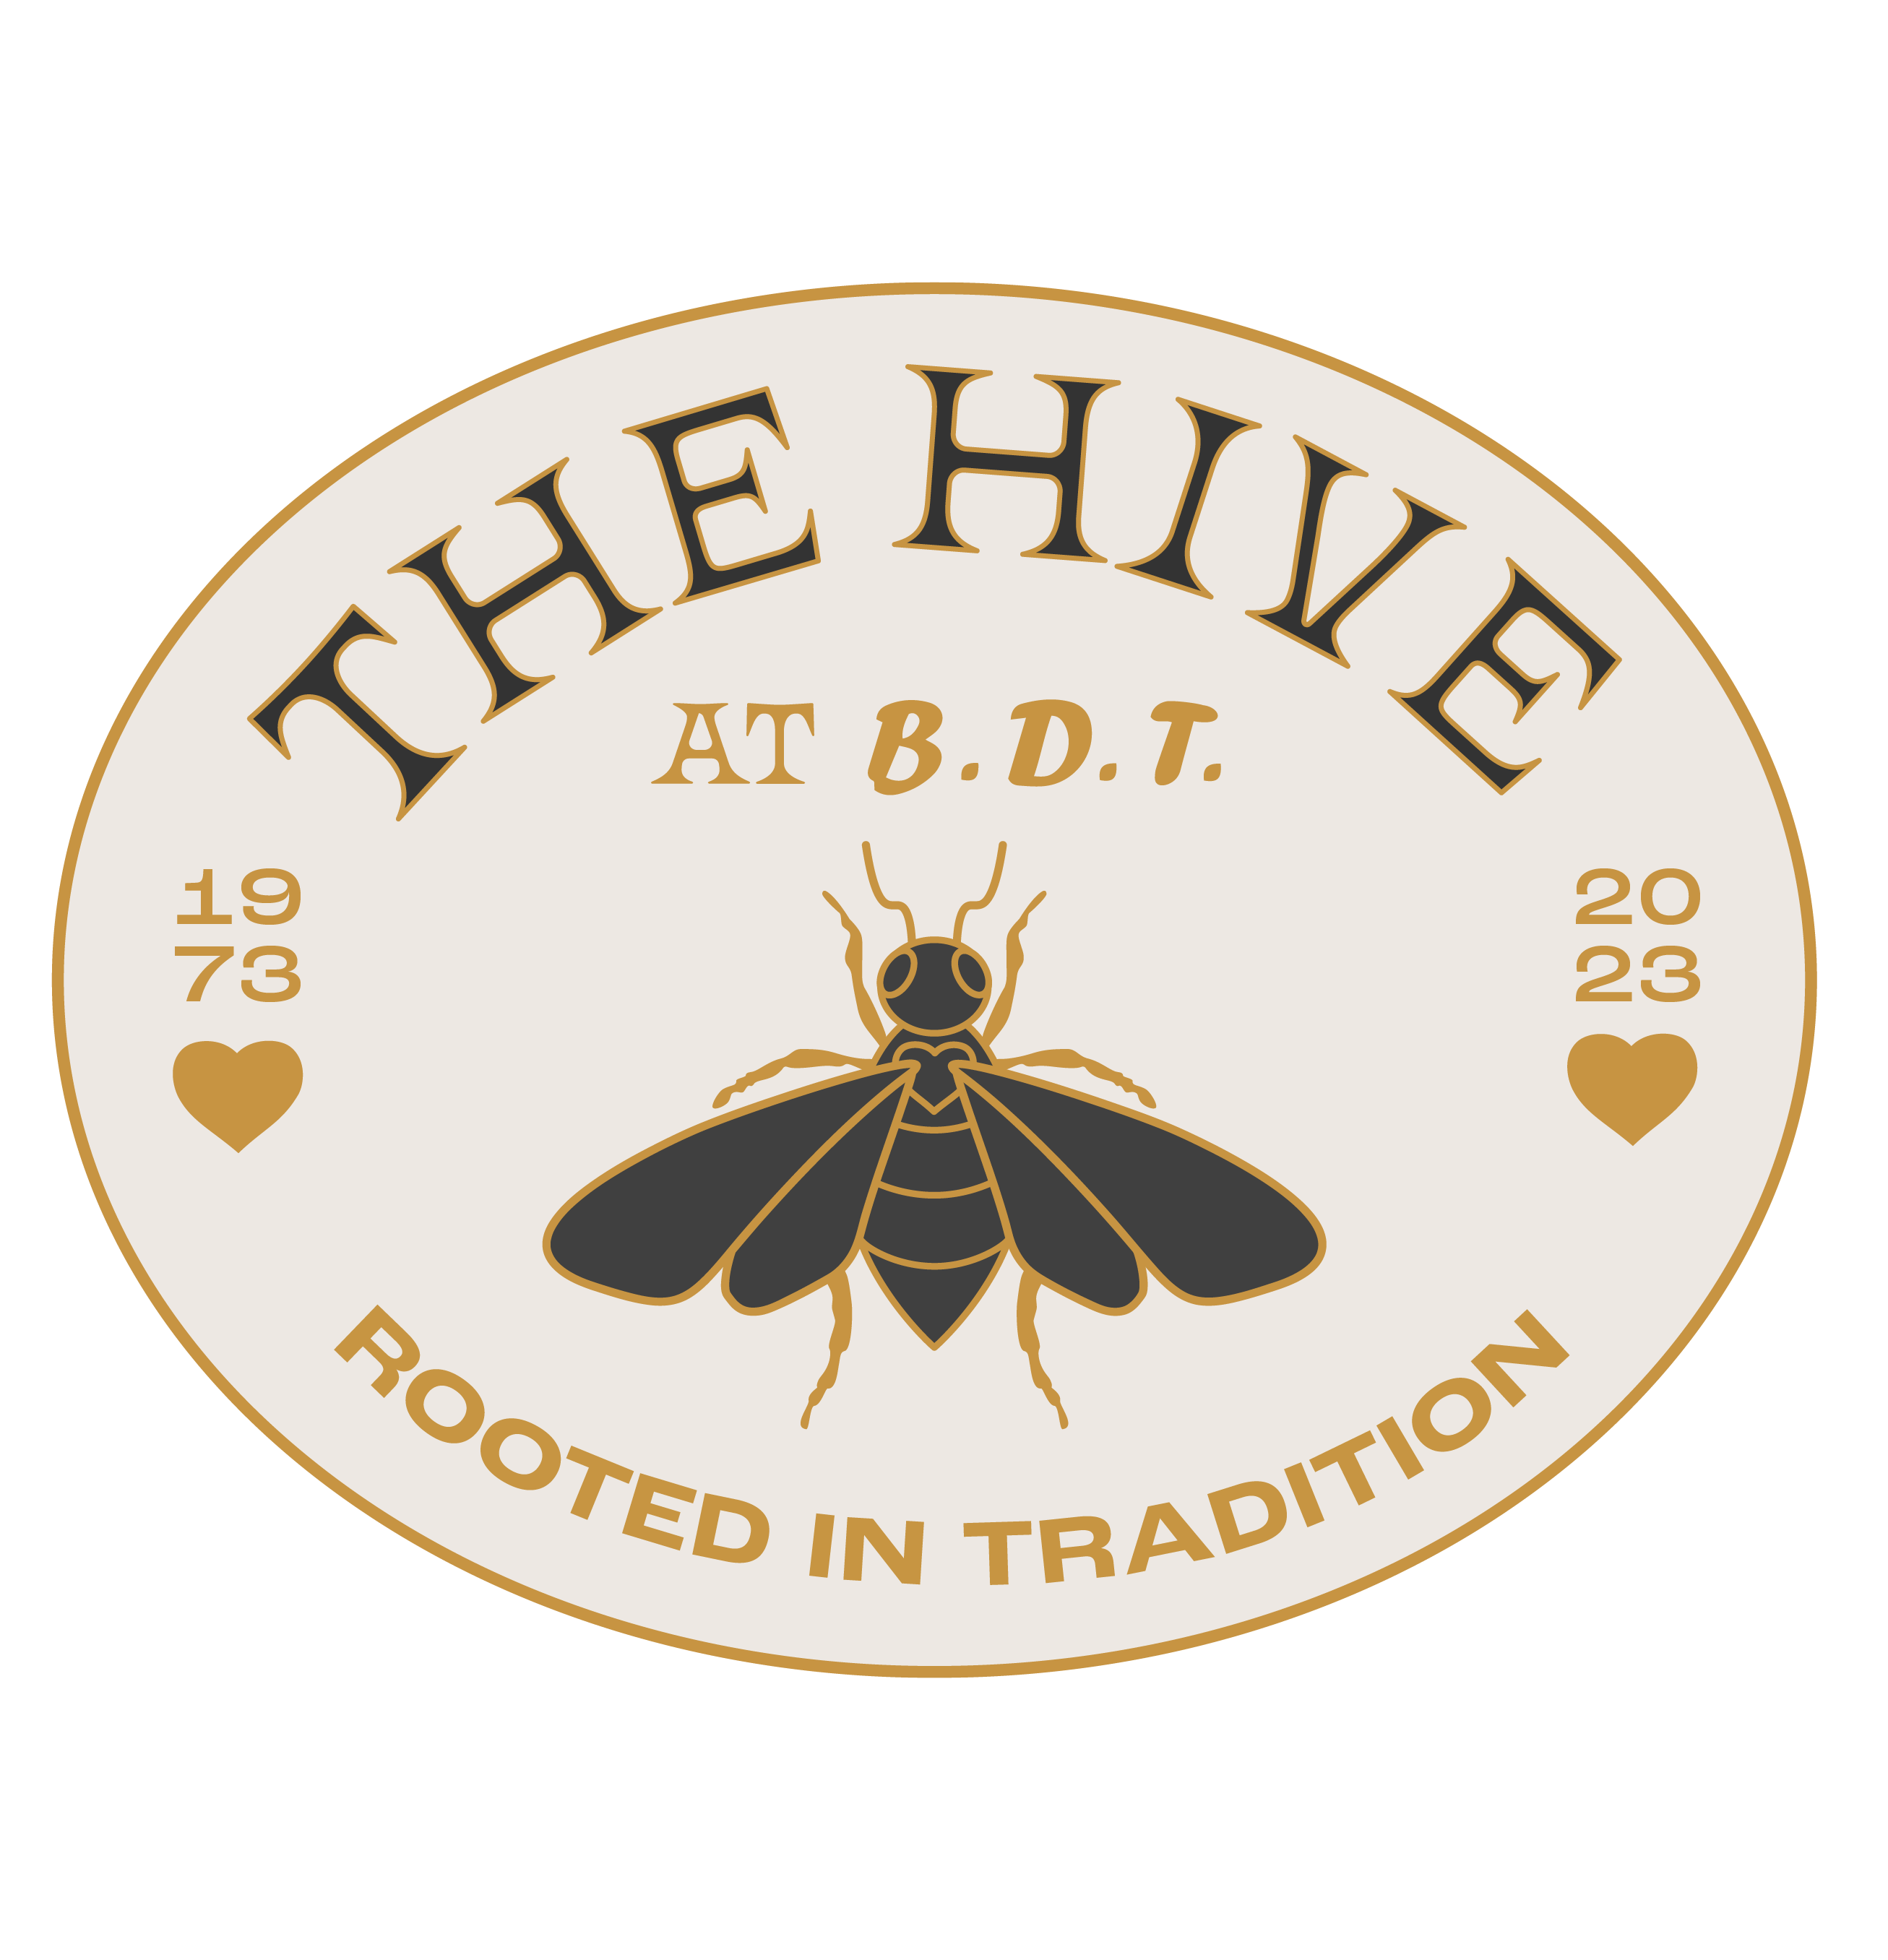 The Hive at BDT logo